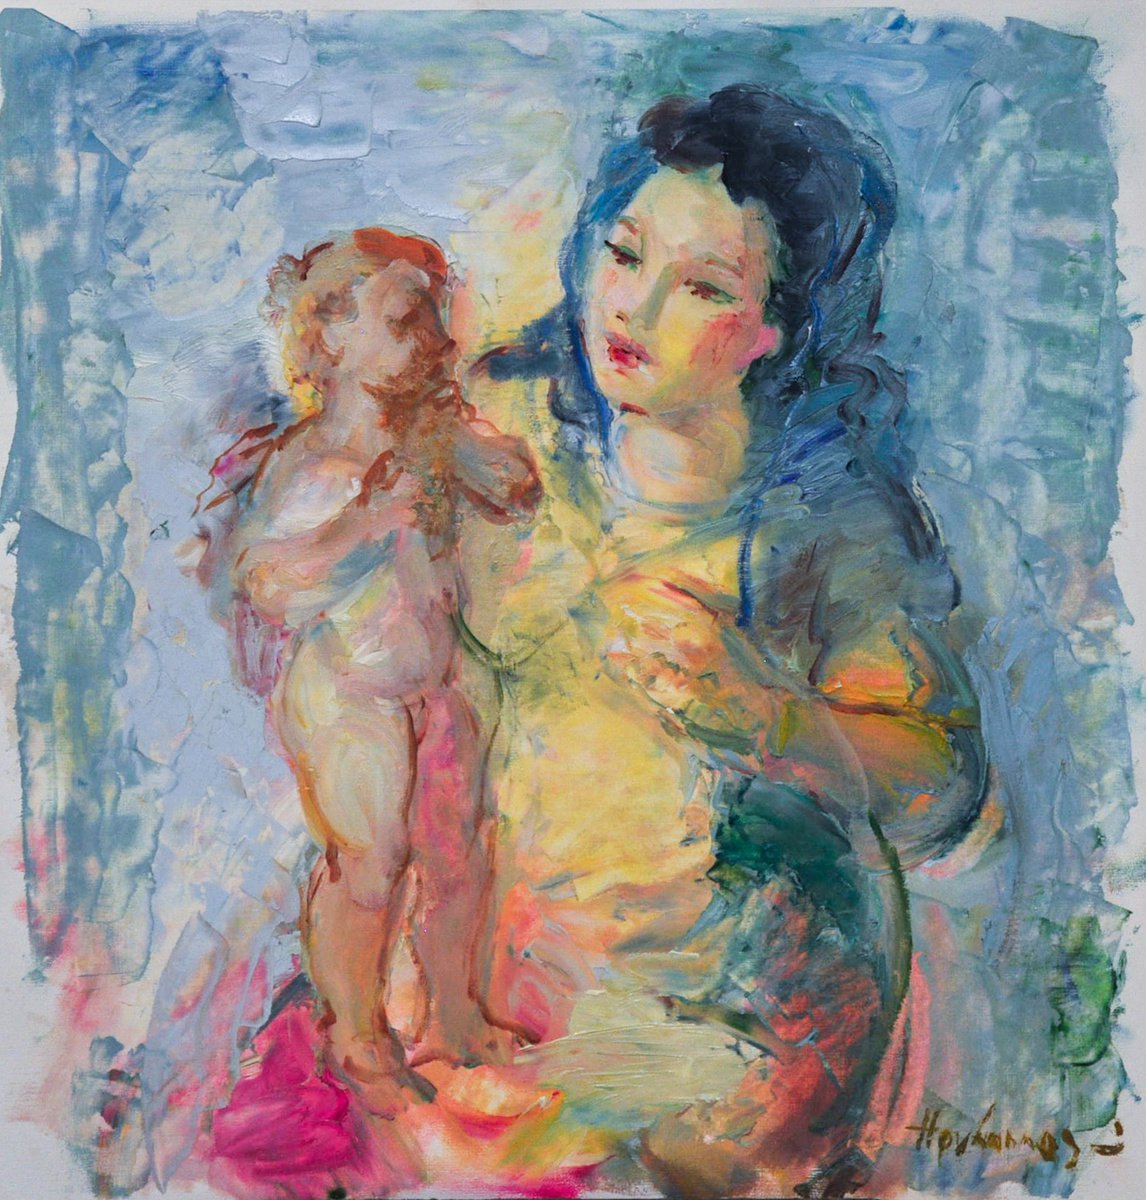 Madonna and child by Hovhannes Haroutiounian